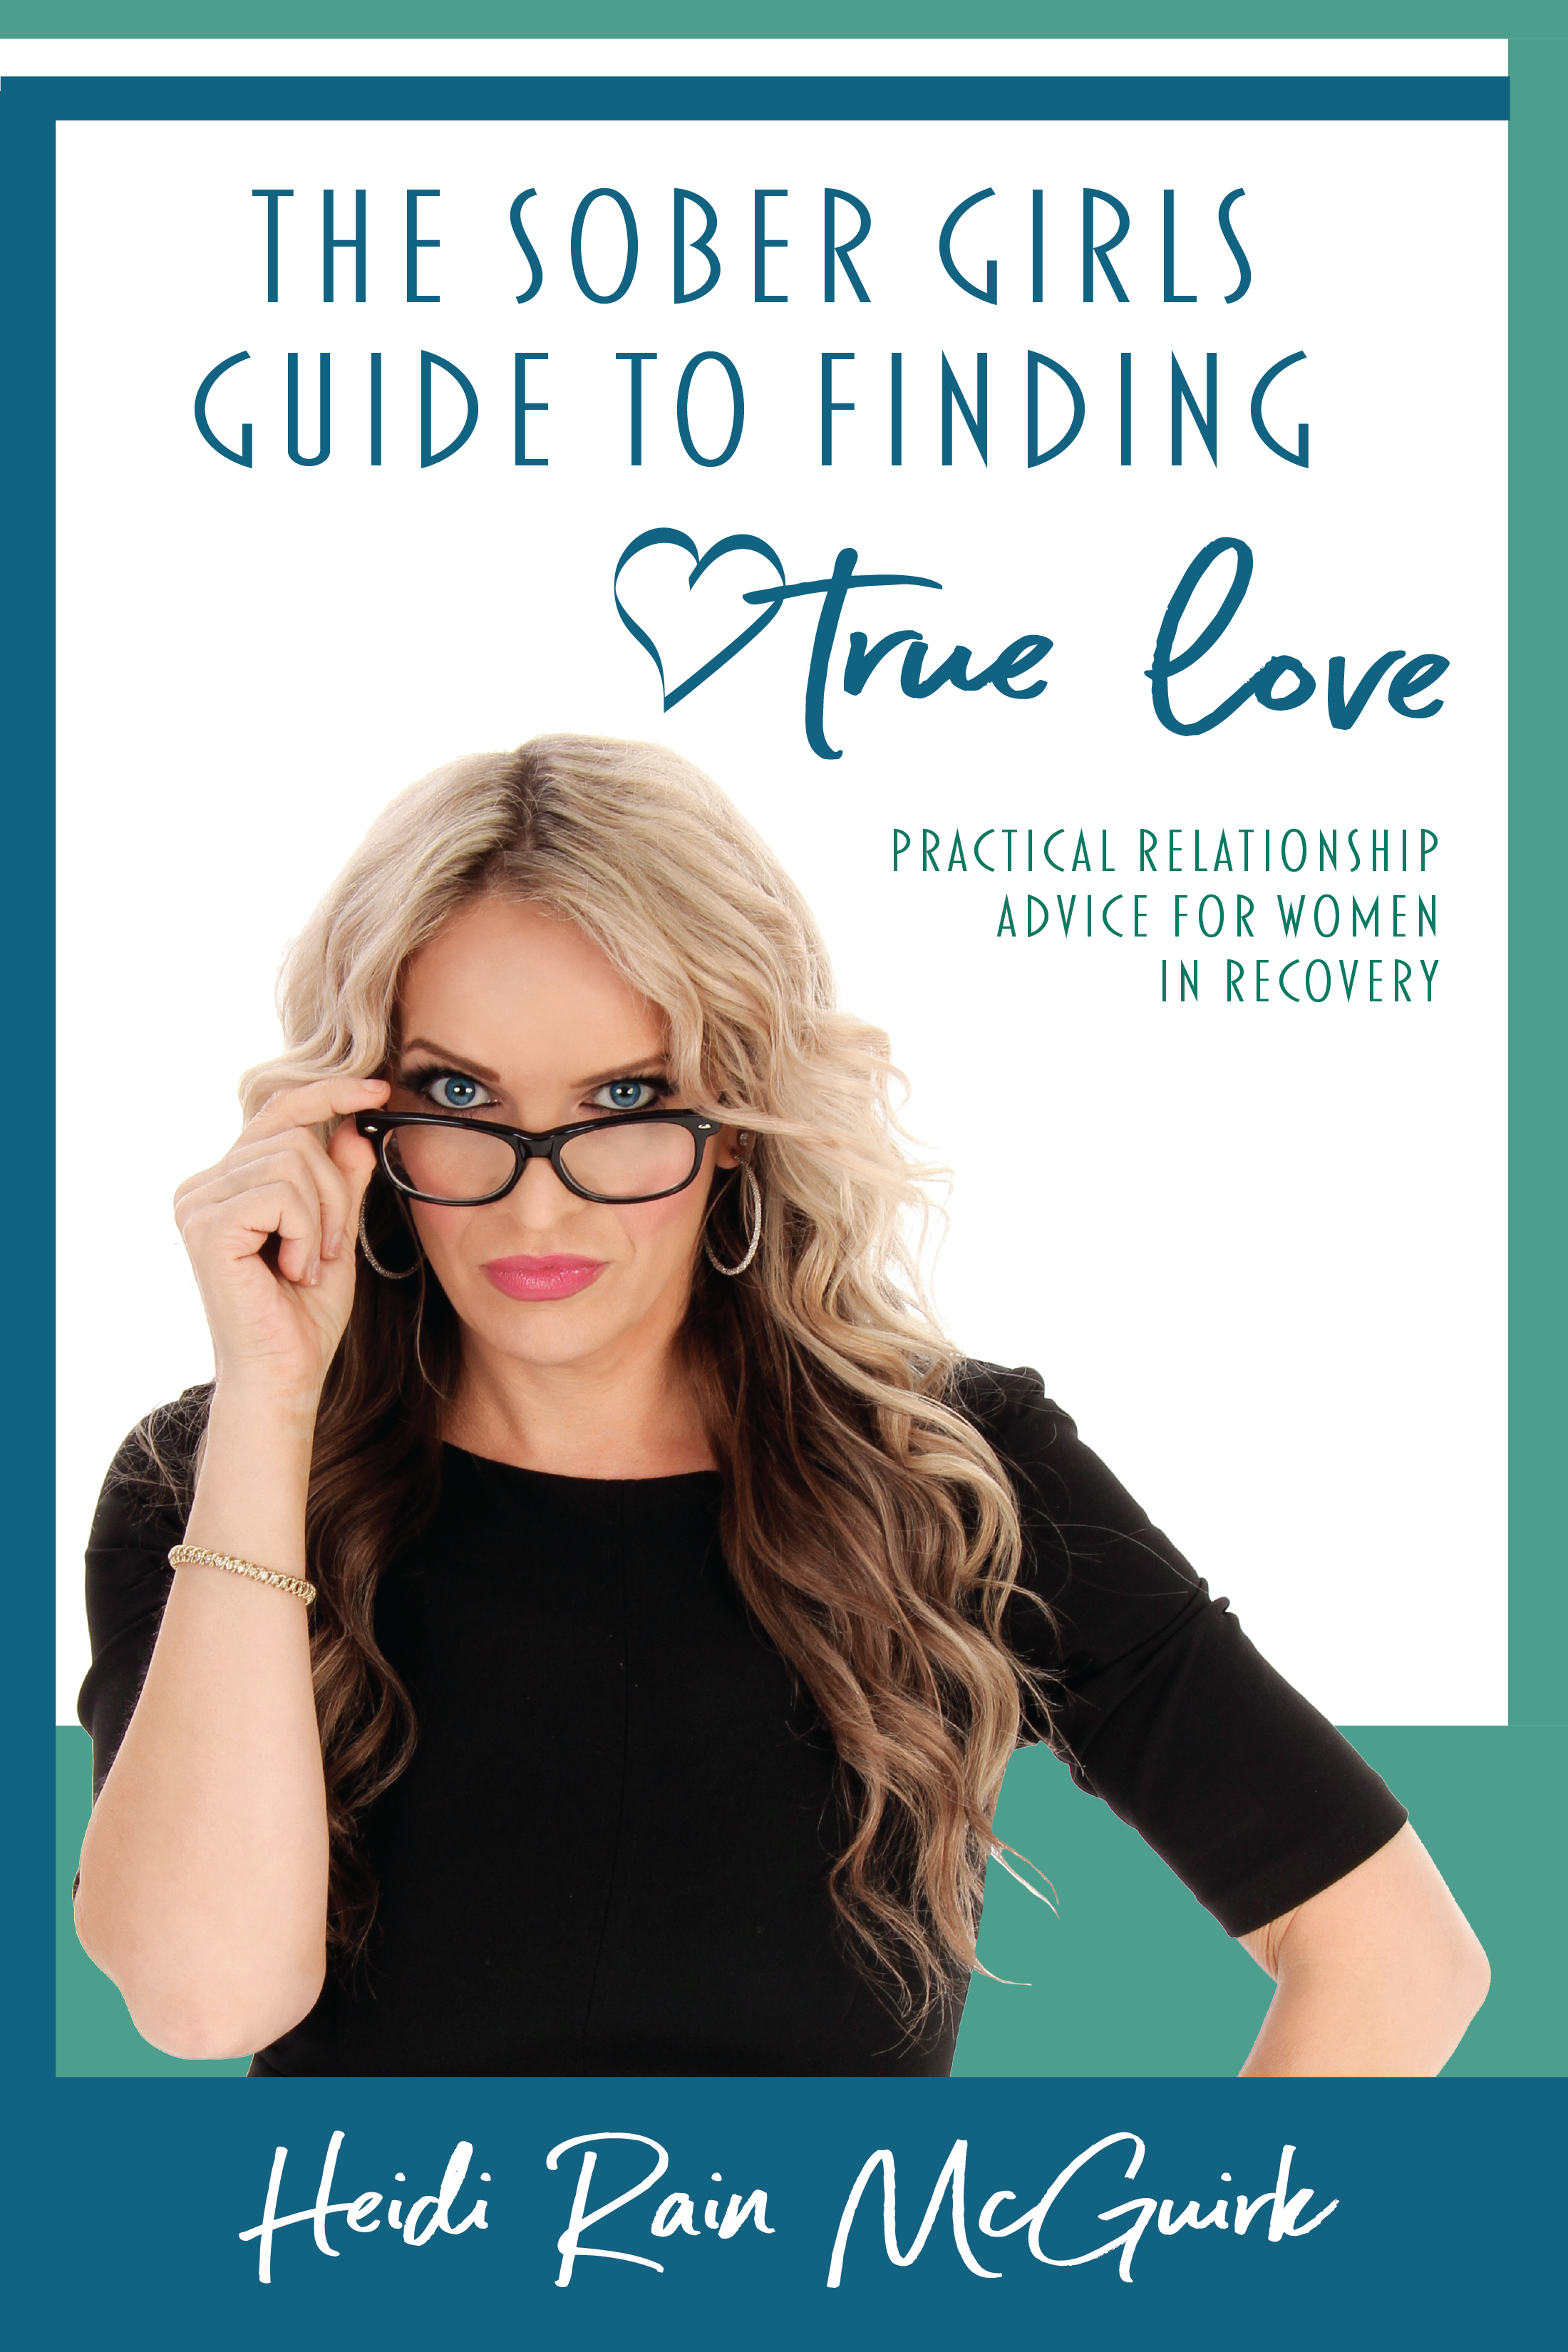 Heidi Rain's book The Sober Girl's Guide to Finding True Love is fiulled with practical dating and relationship advice for those recovering from addiction or substance abuse.